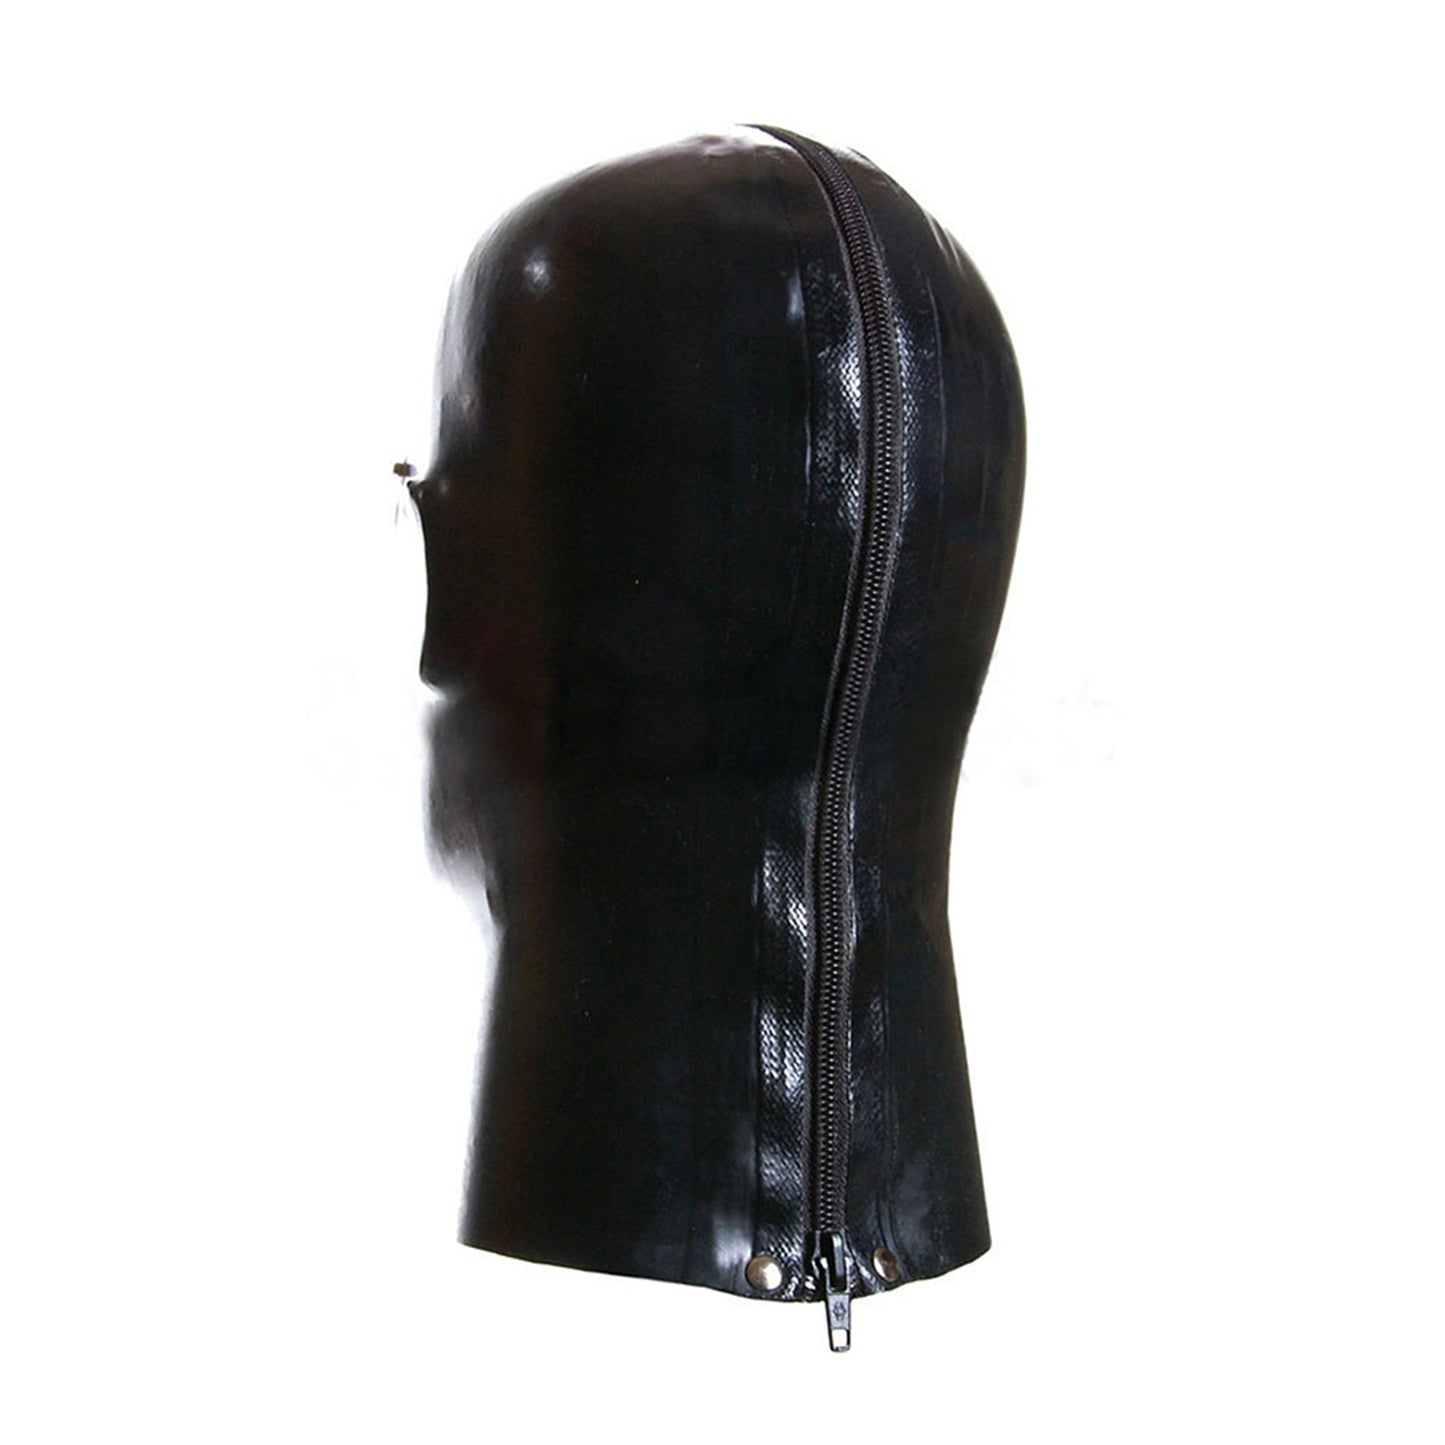 MONNIK Latex Mask Hood with Mirror Eyes and Mouth Open Style Two color splicing for Fetish Latex Bodysuit Party